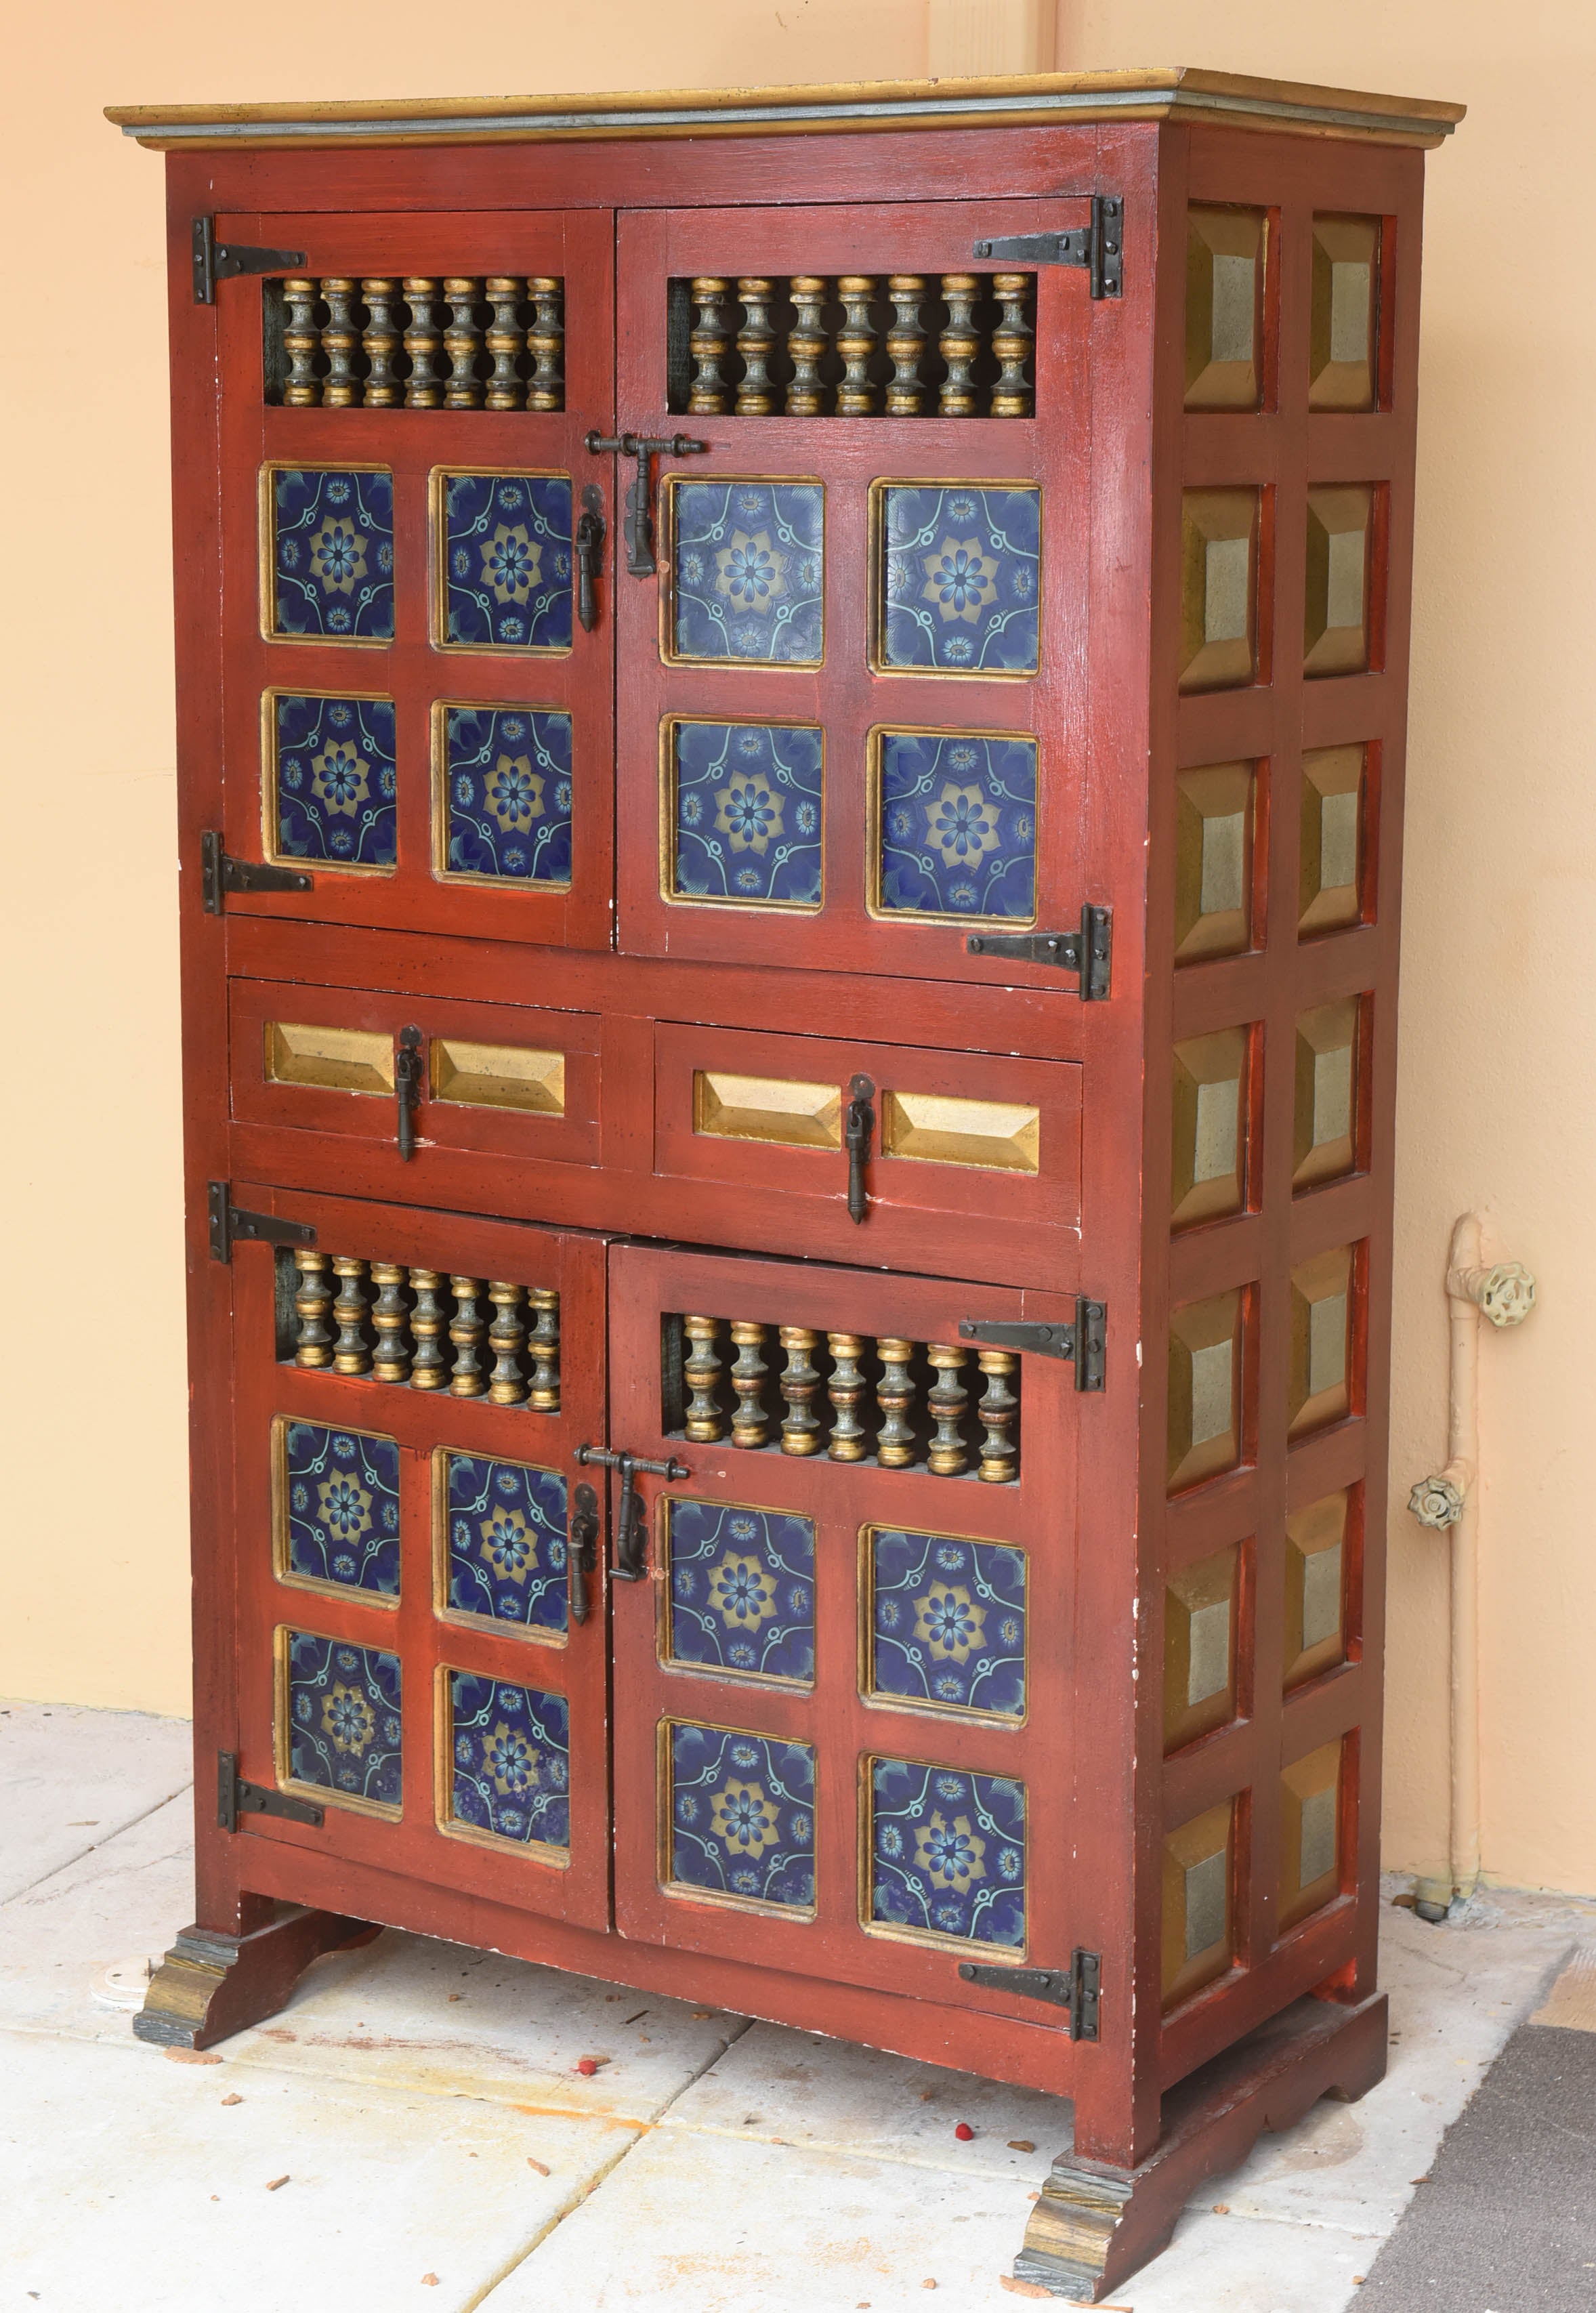 Spanish Hand-Painted Antique Kitchen Cupboard with Blue Tiles